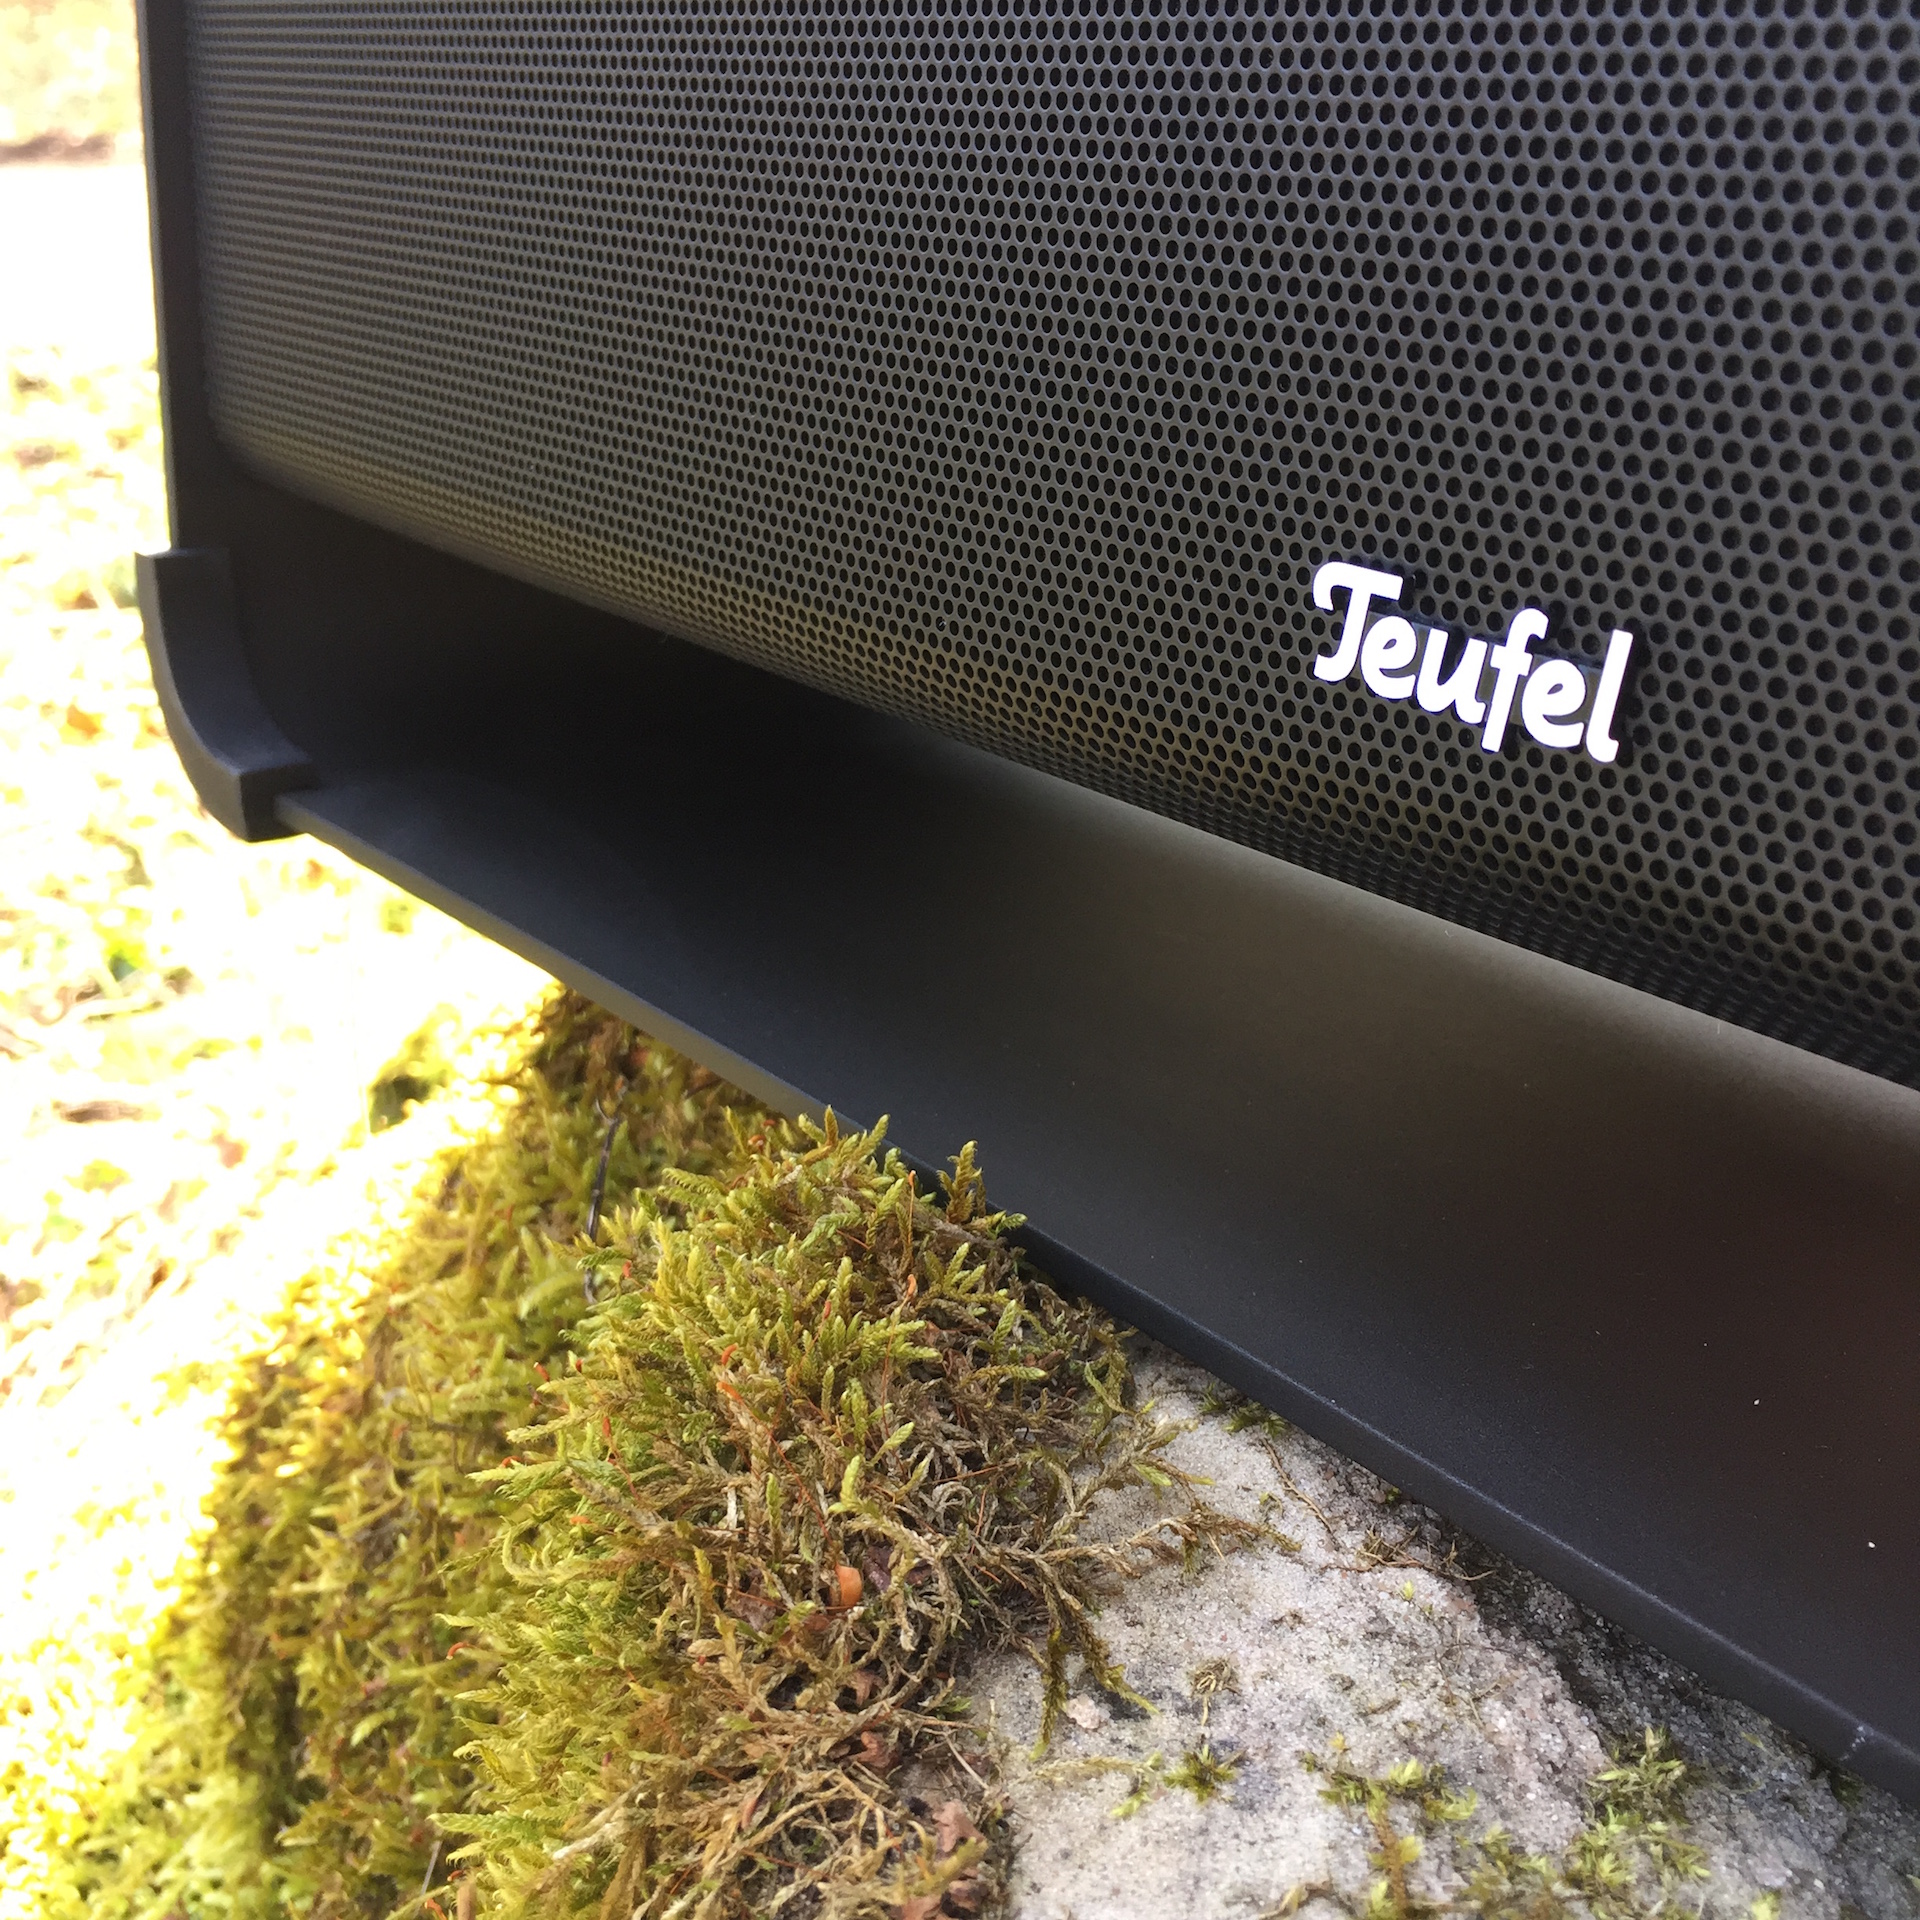 Teufel Boomster XL - 41